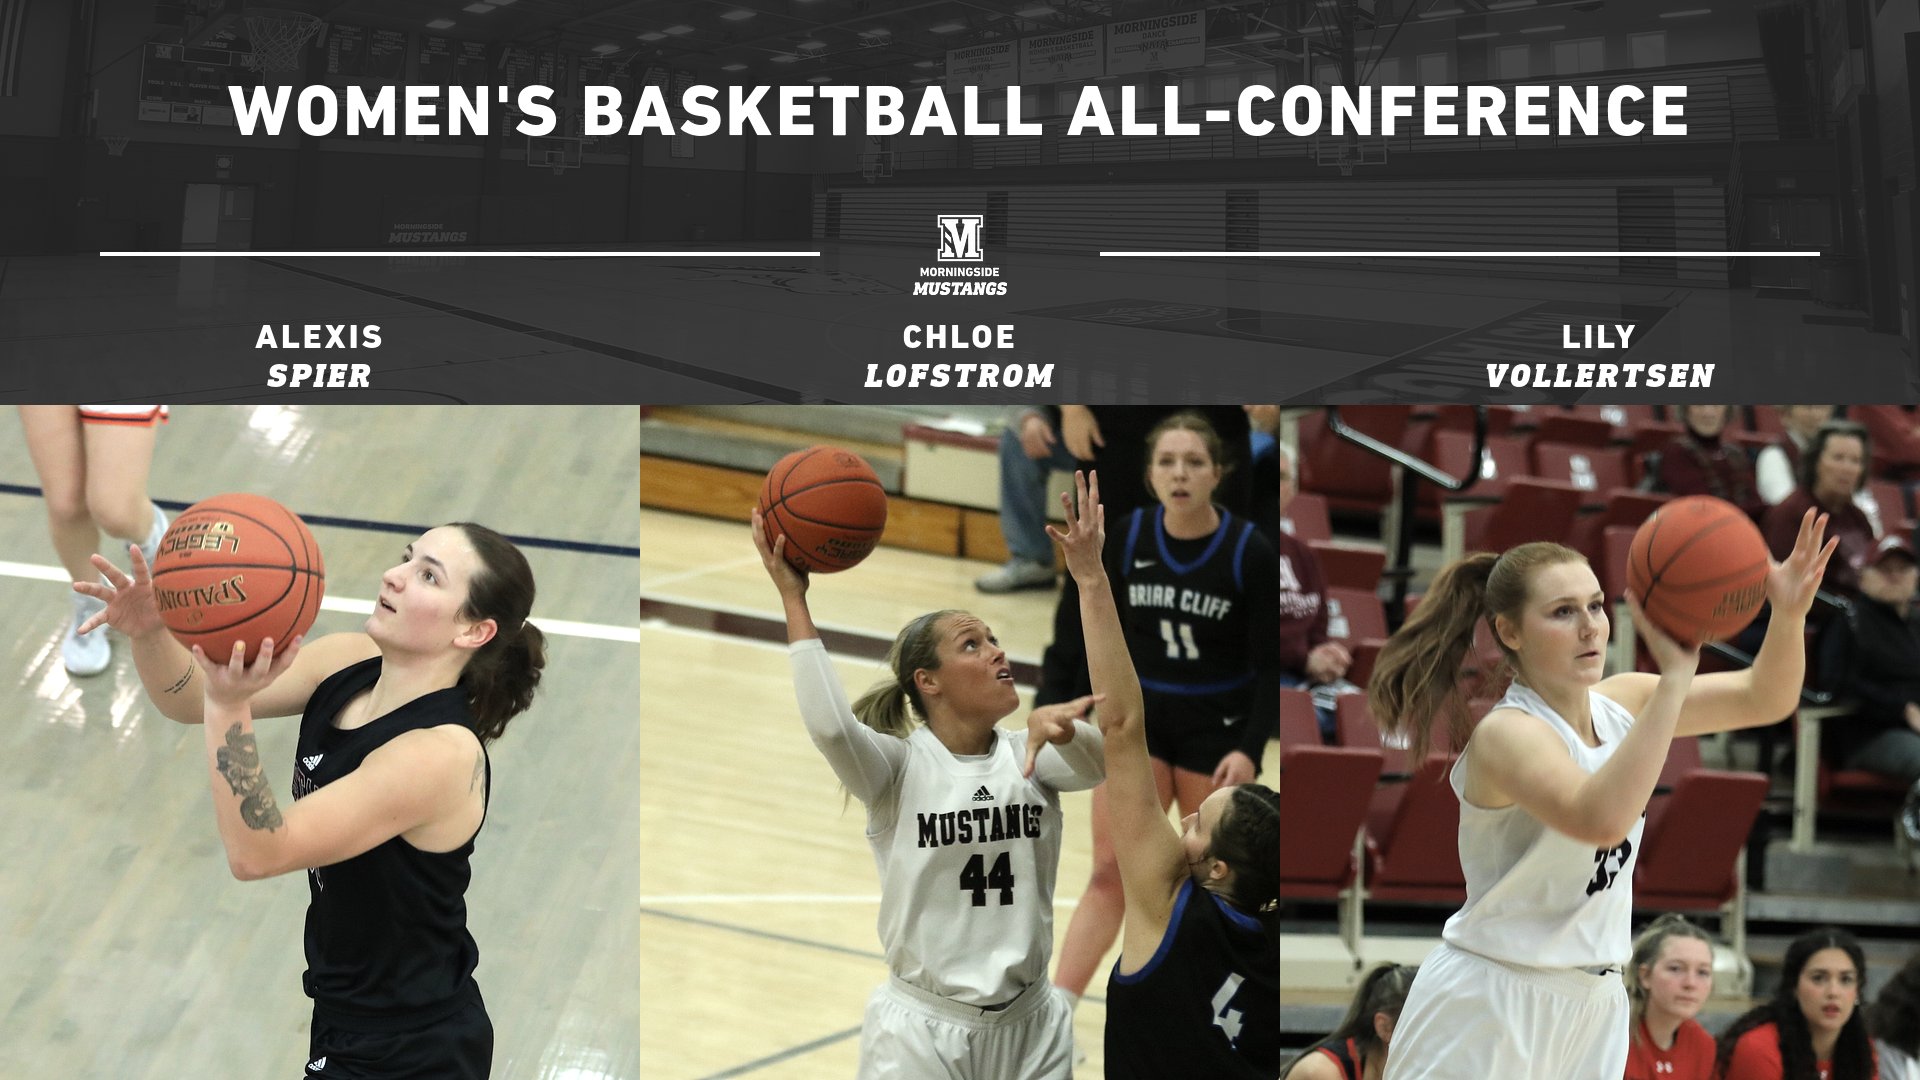 Spier named all-conference, Lofstrom and Vollertsen honorable mention